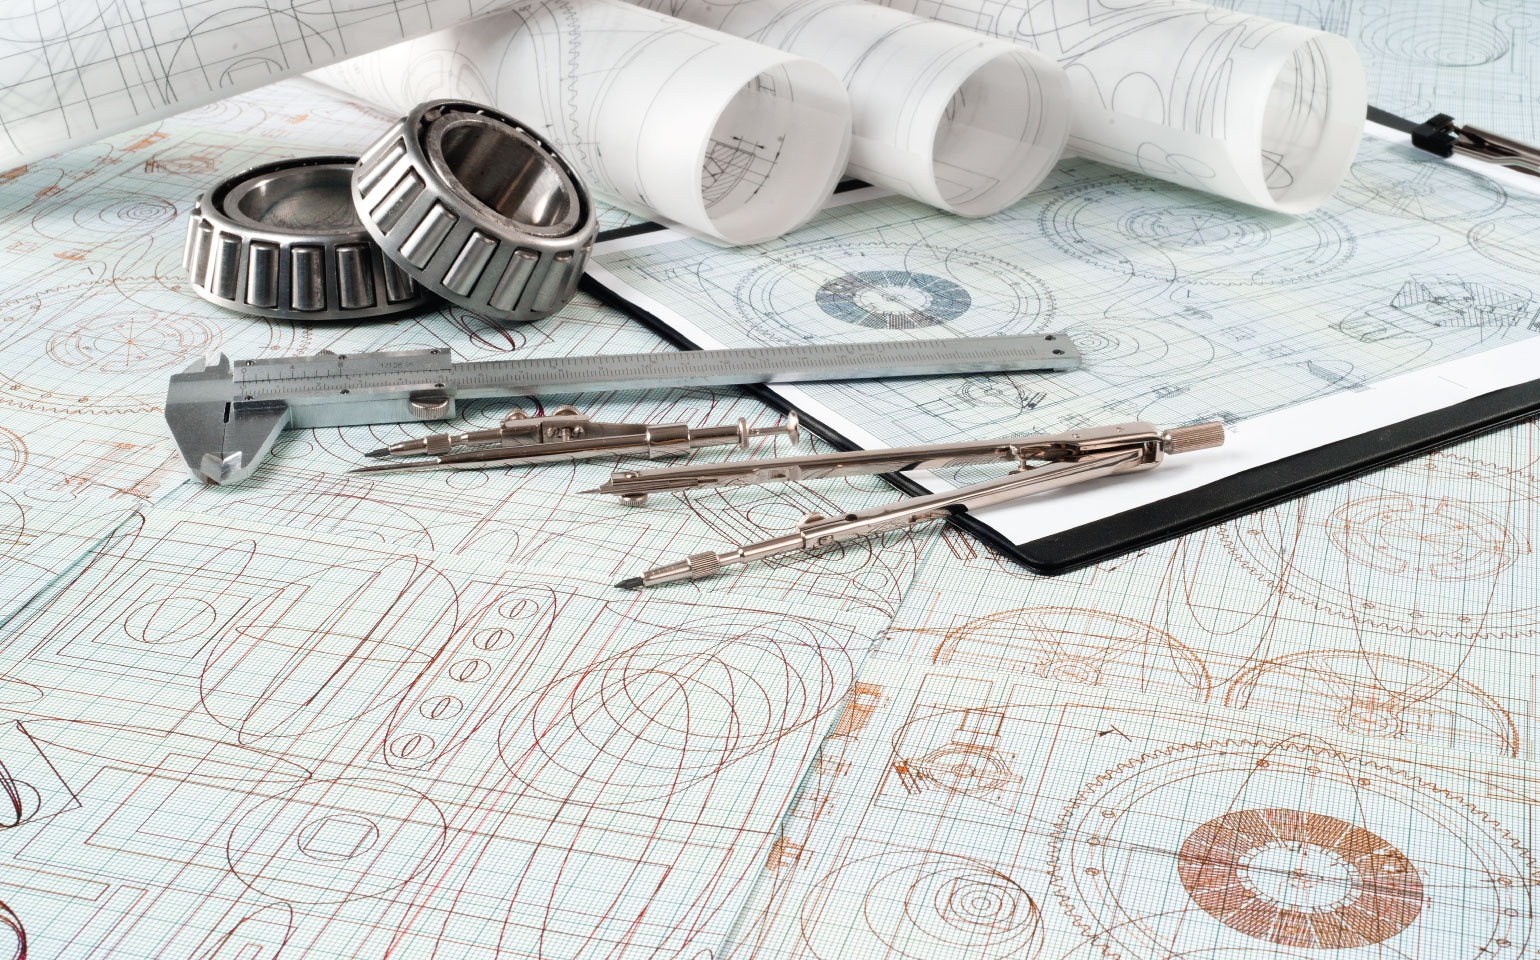 Engineering drawings and tools